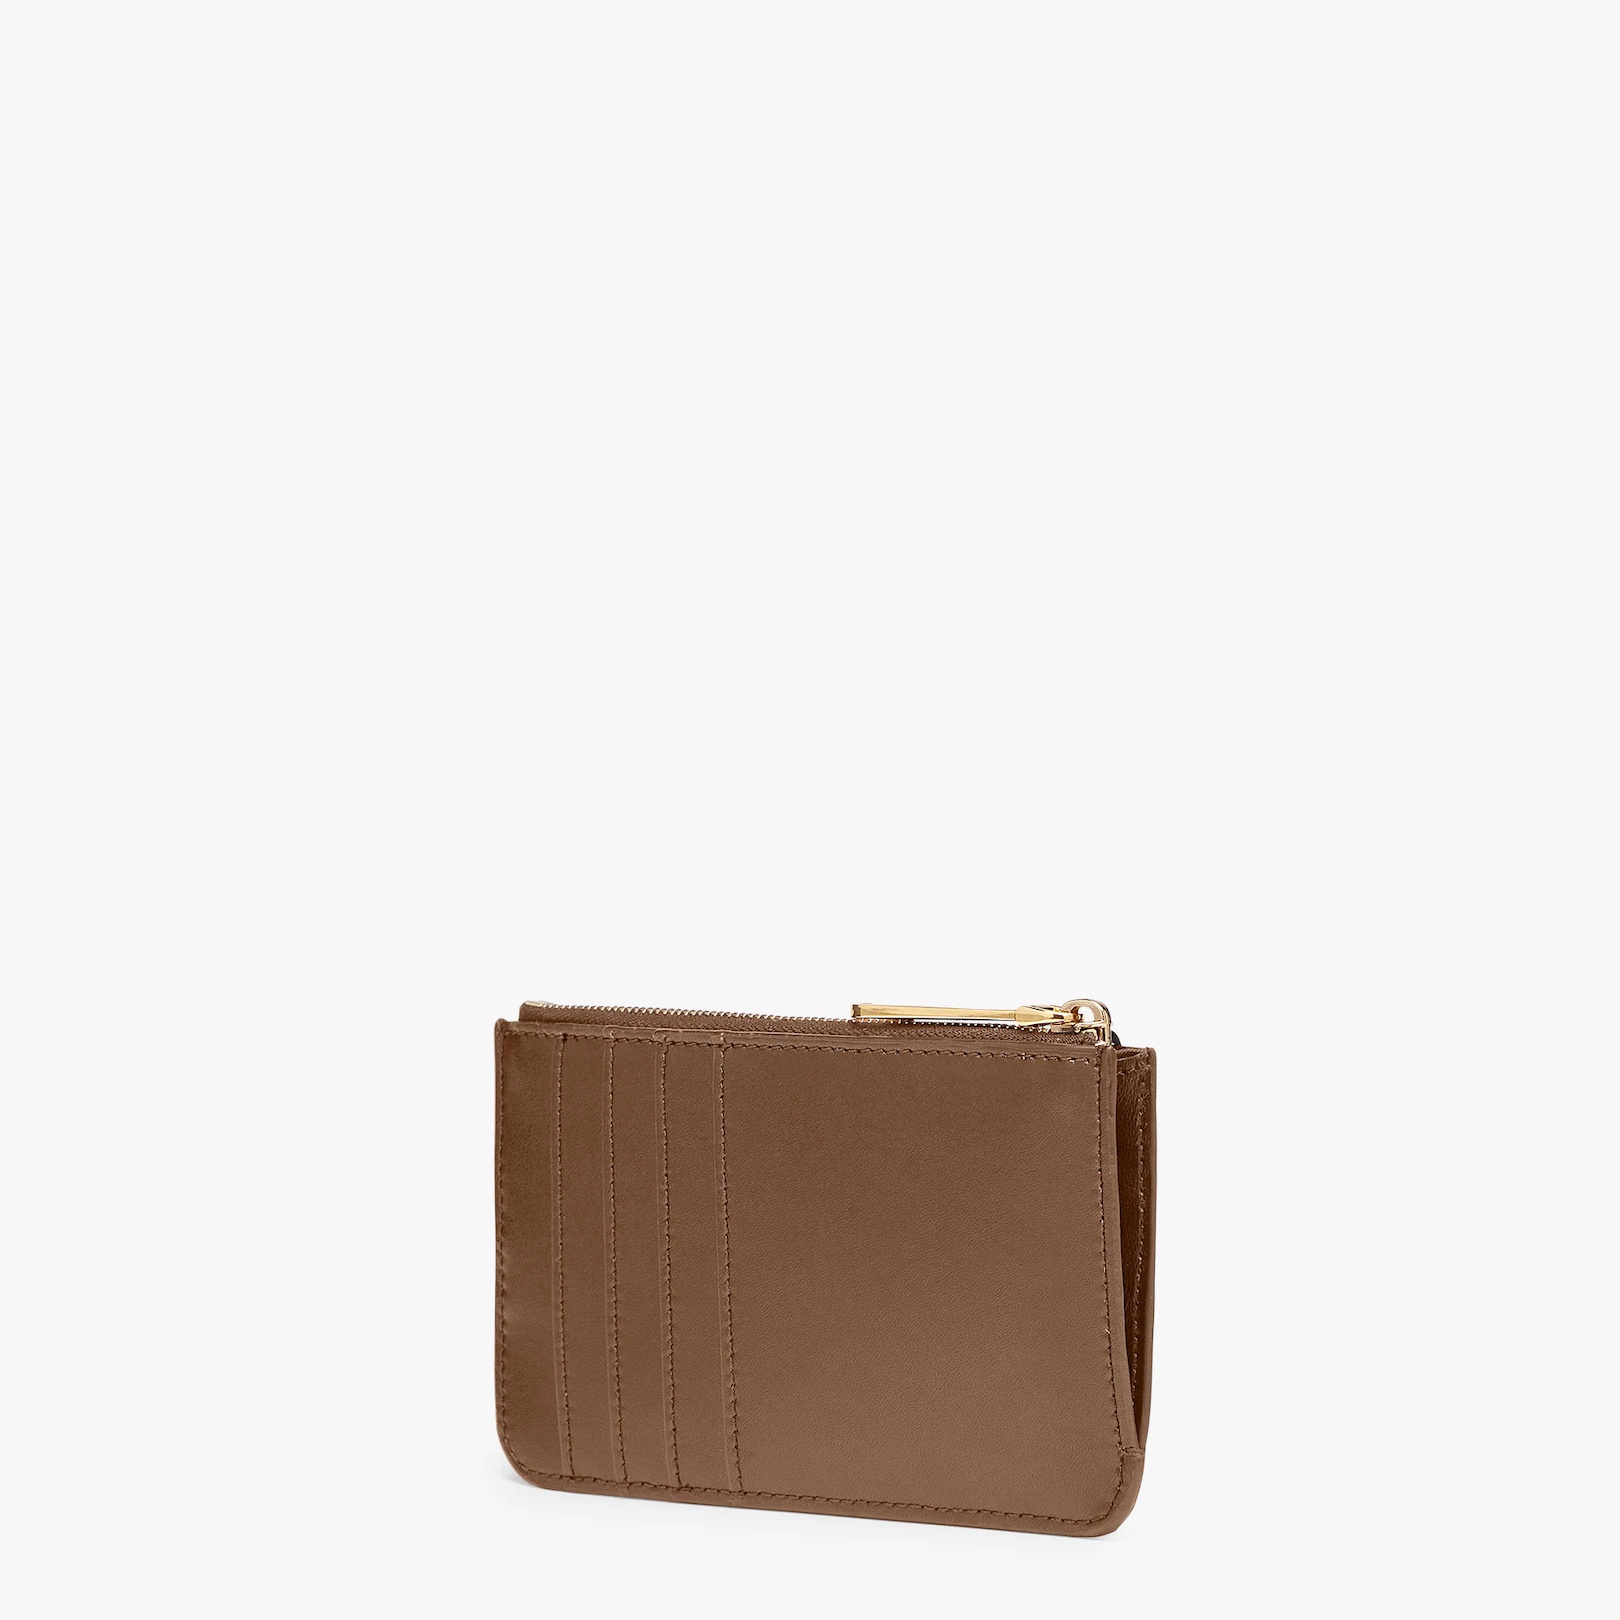 Brown leather pouch - 2